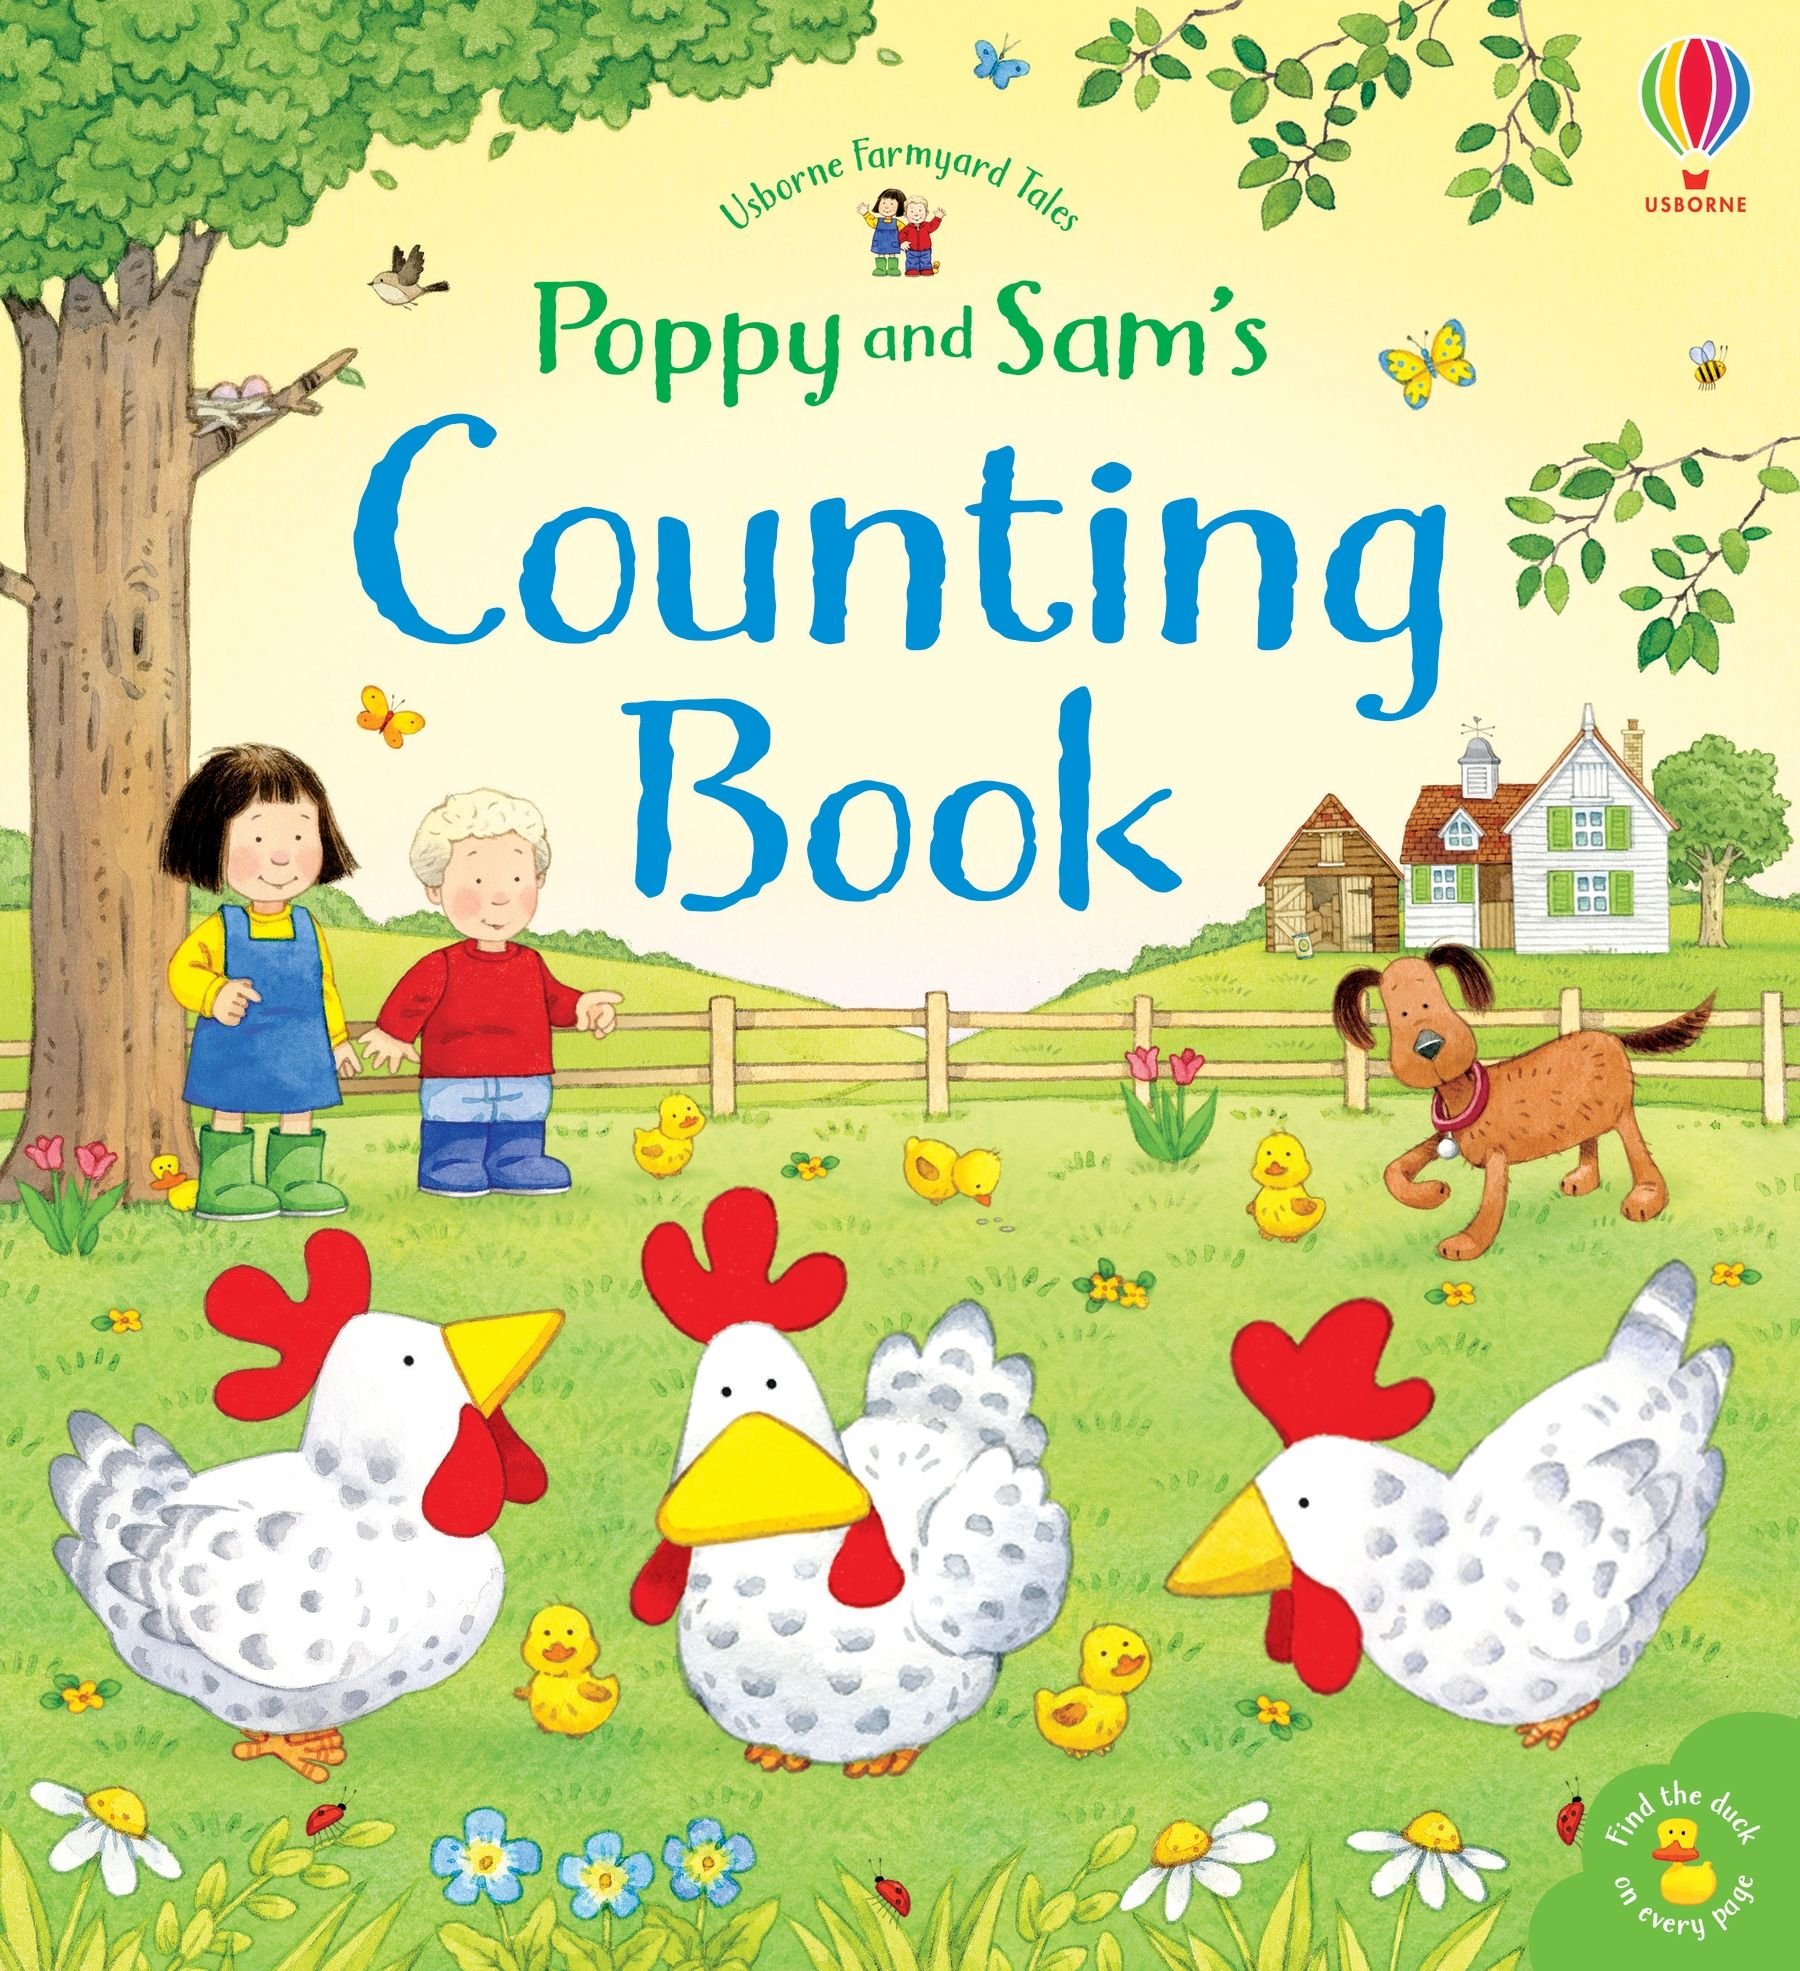 Sam's and Poppy counting book